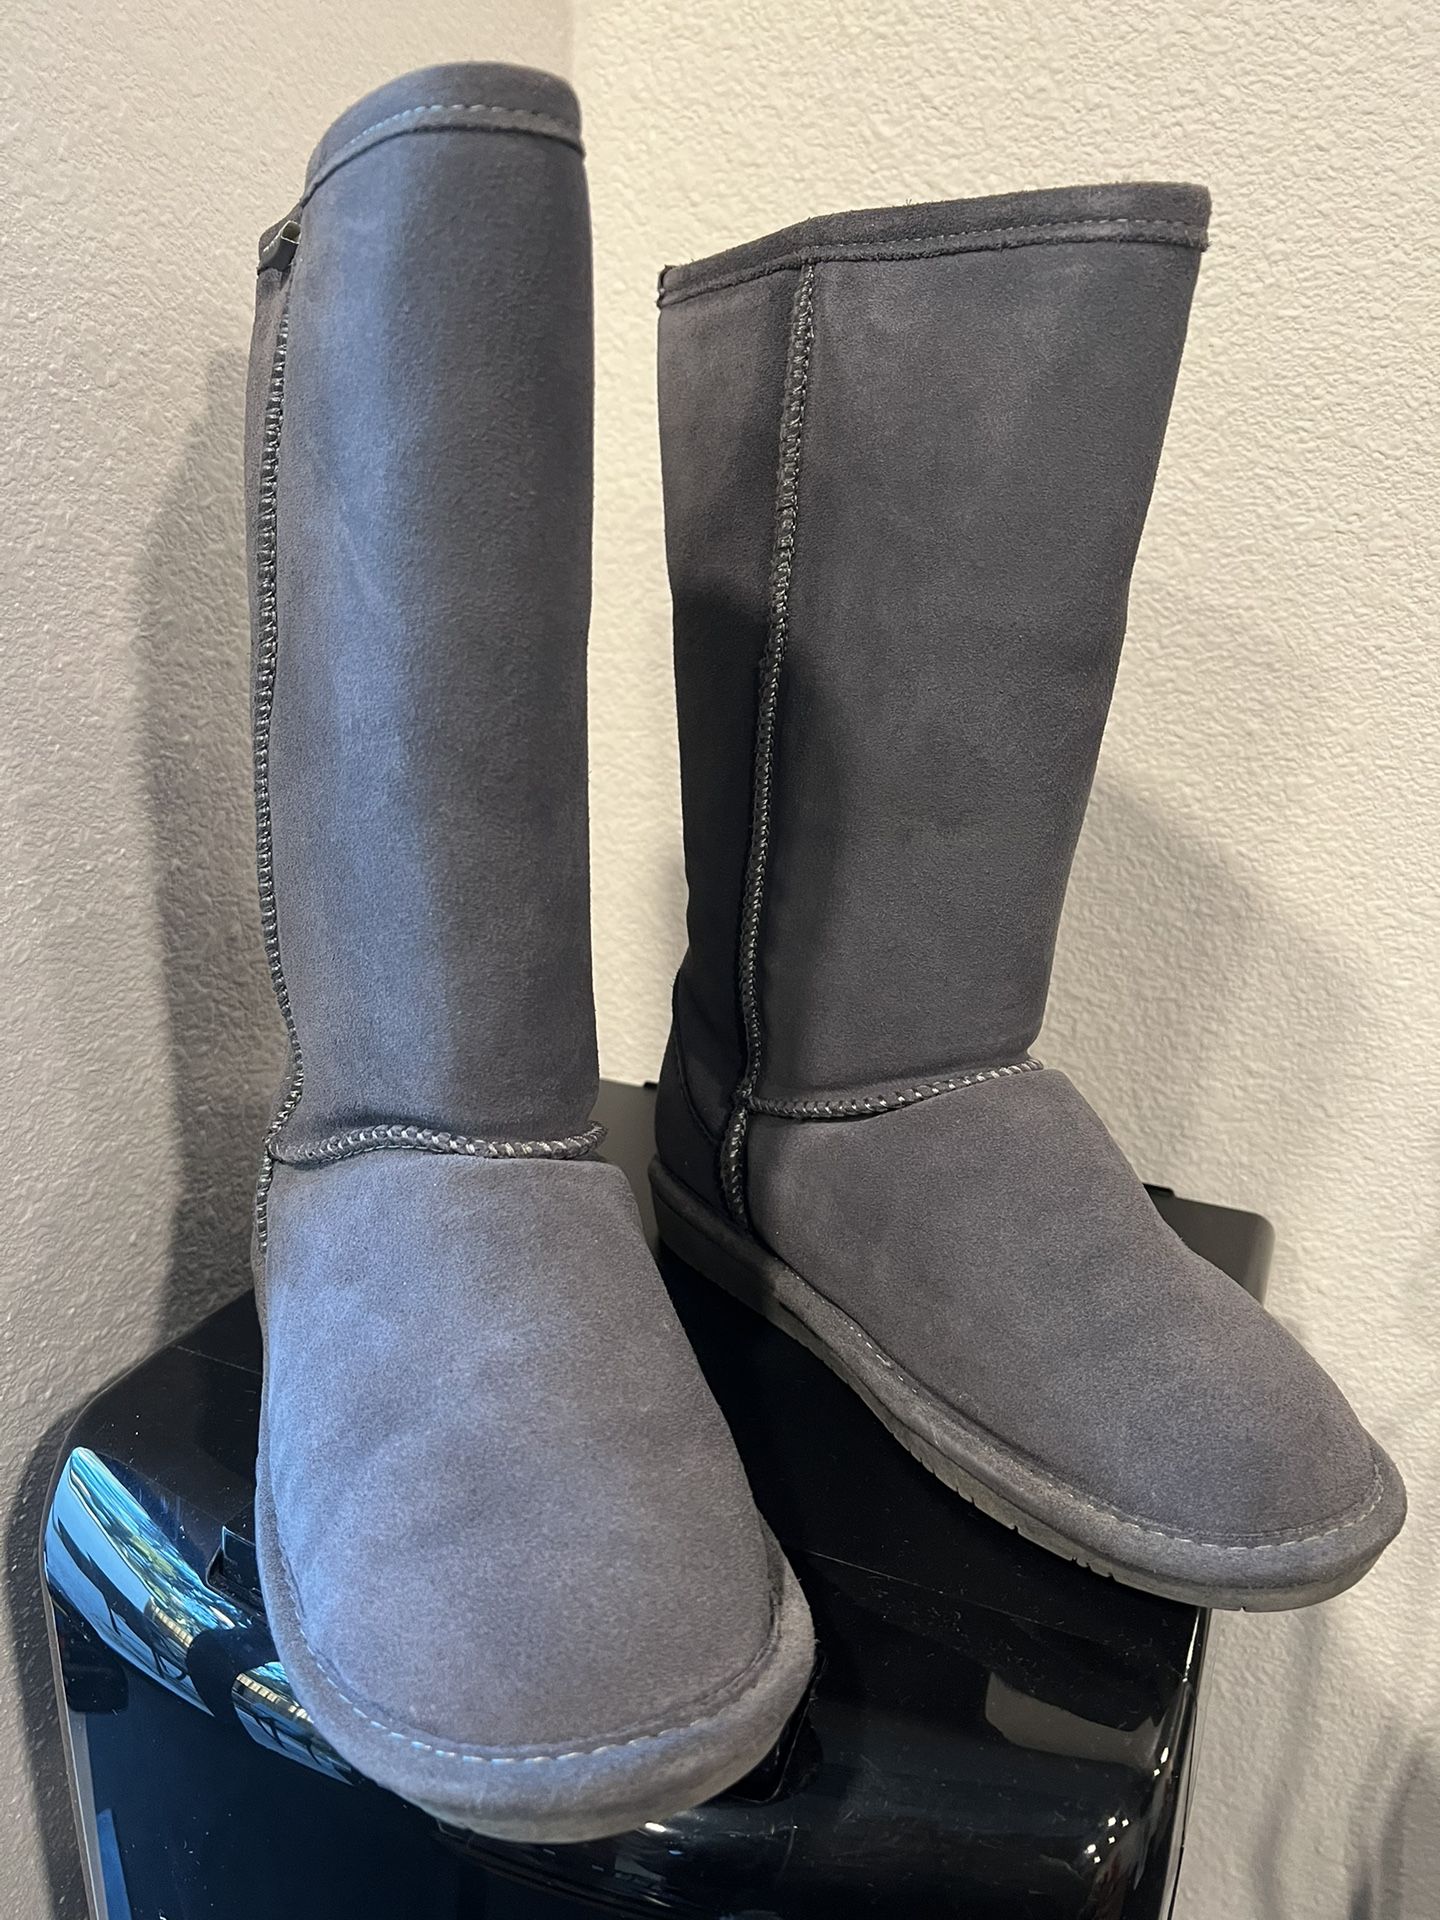 BearPaw - Tall Gray Snow Boots, Size 8